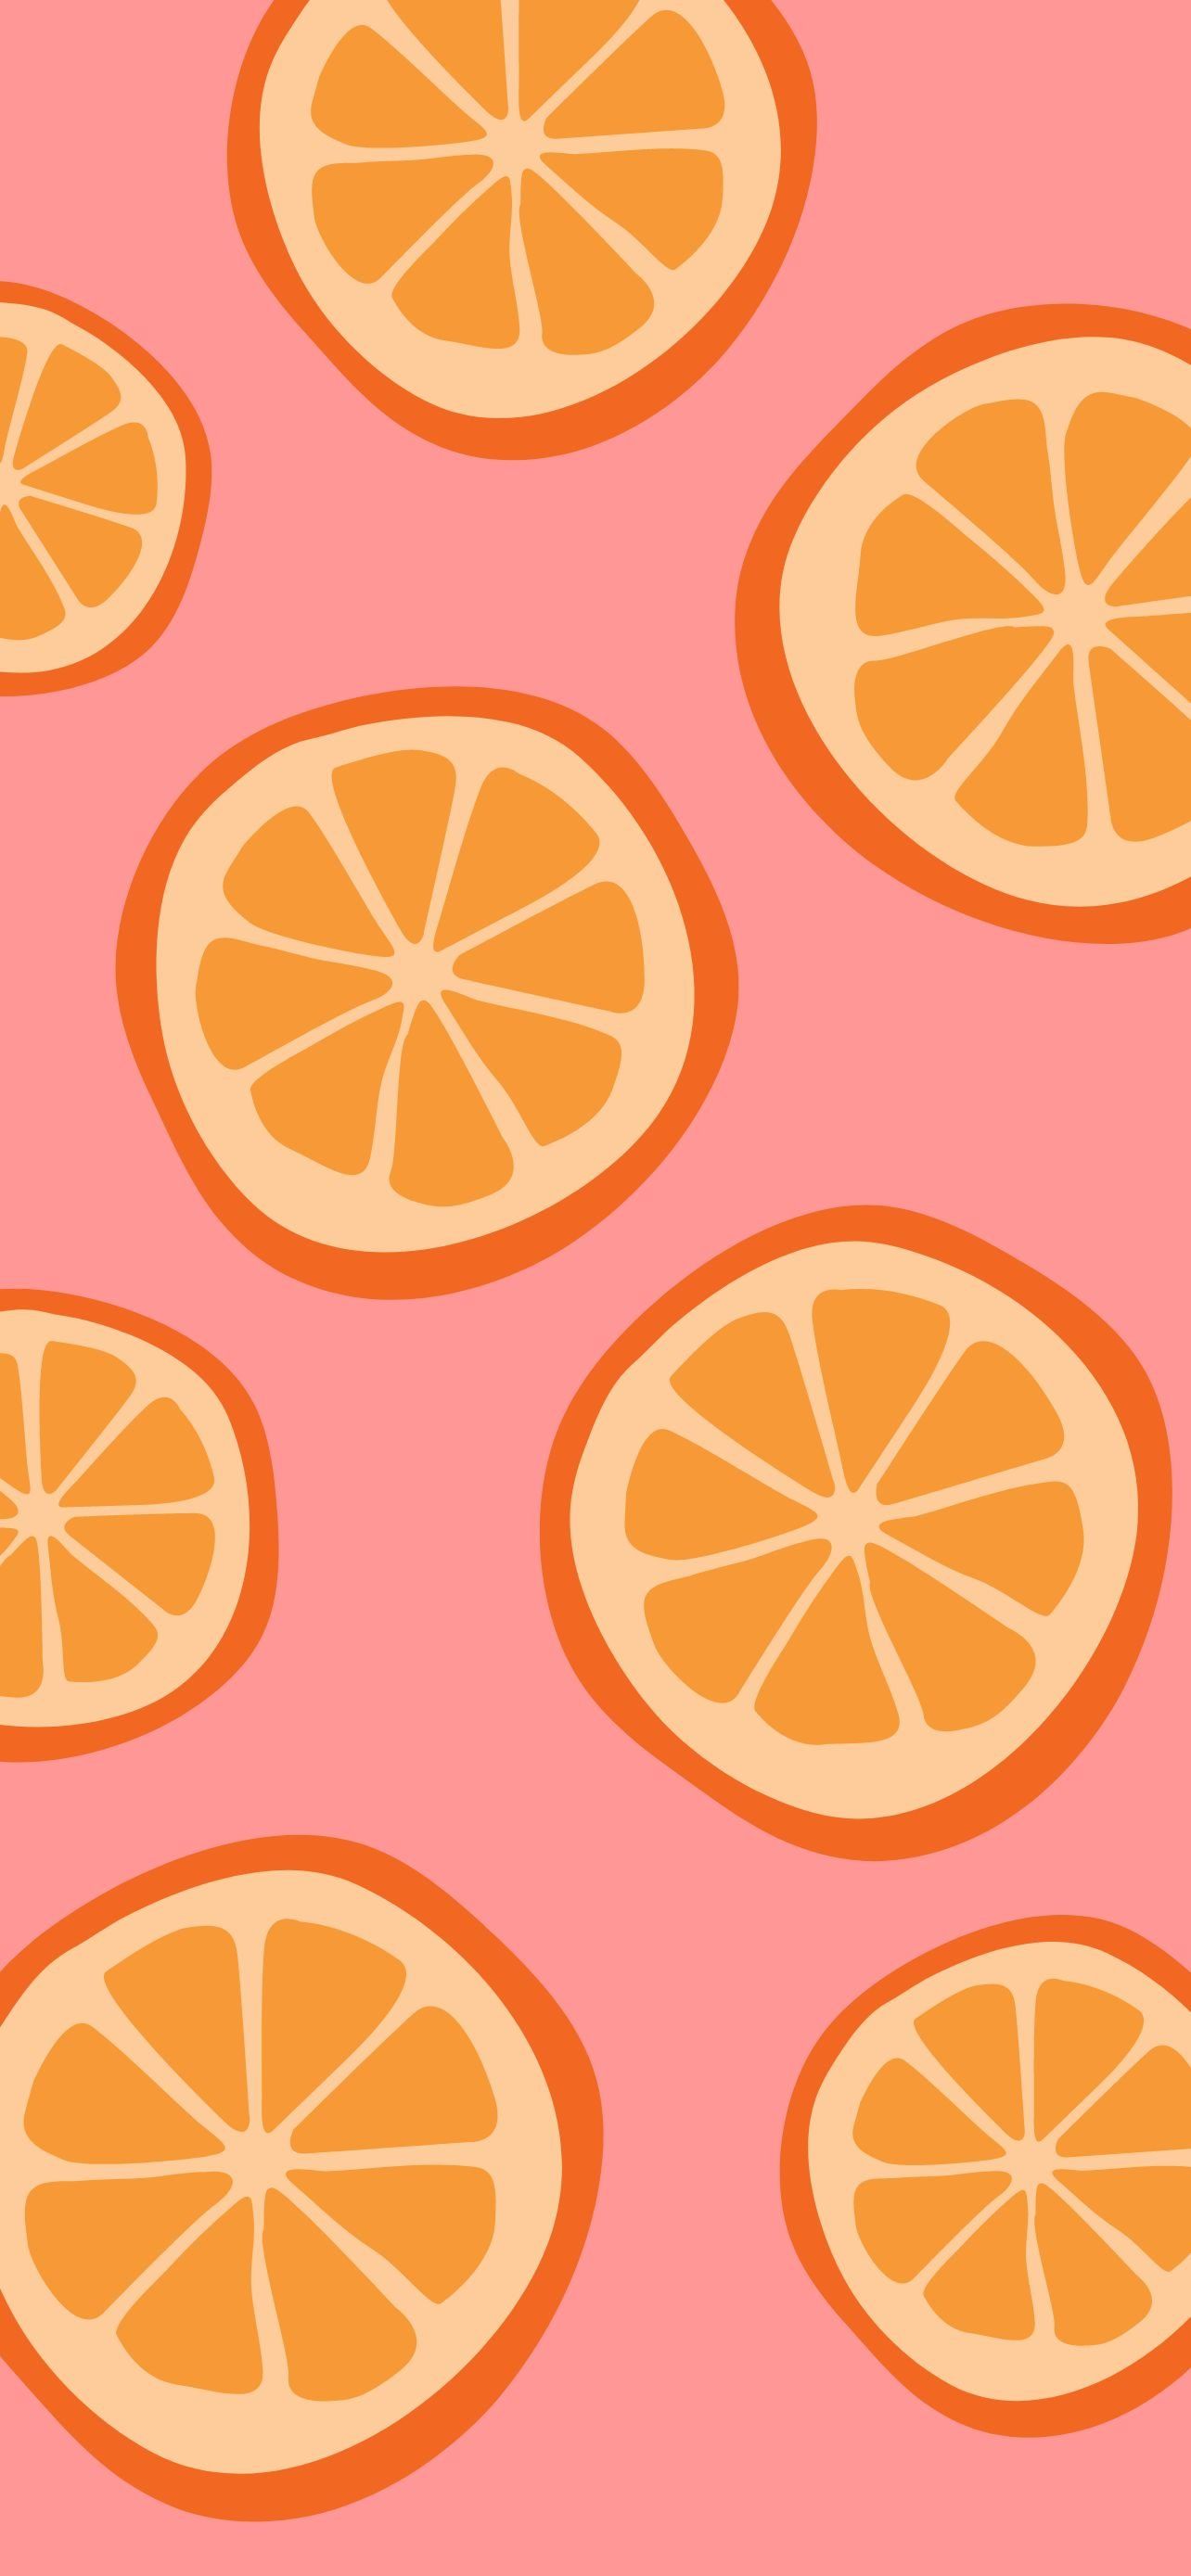 IPhone wallpaper with a pattern of orange slices on a pink background - Lemon